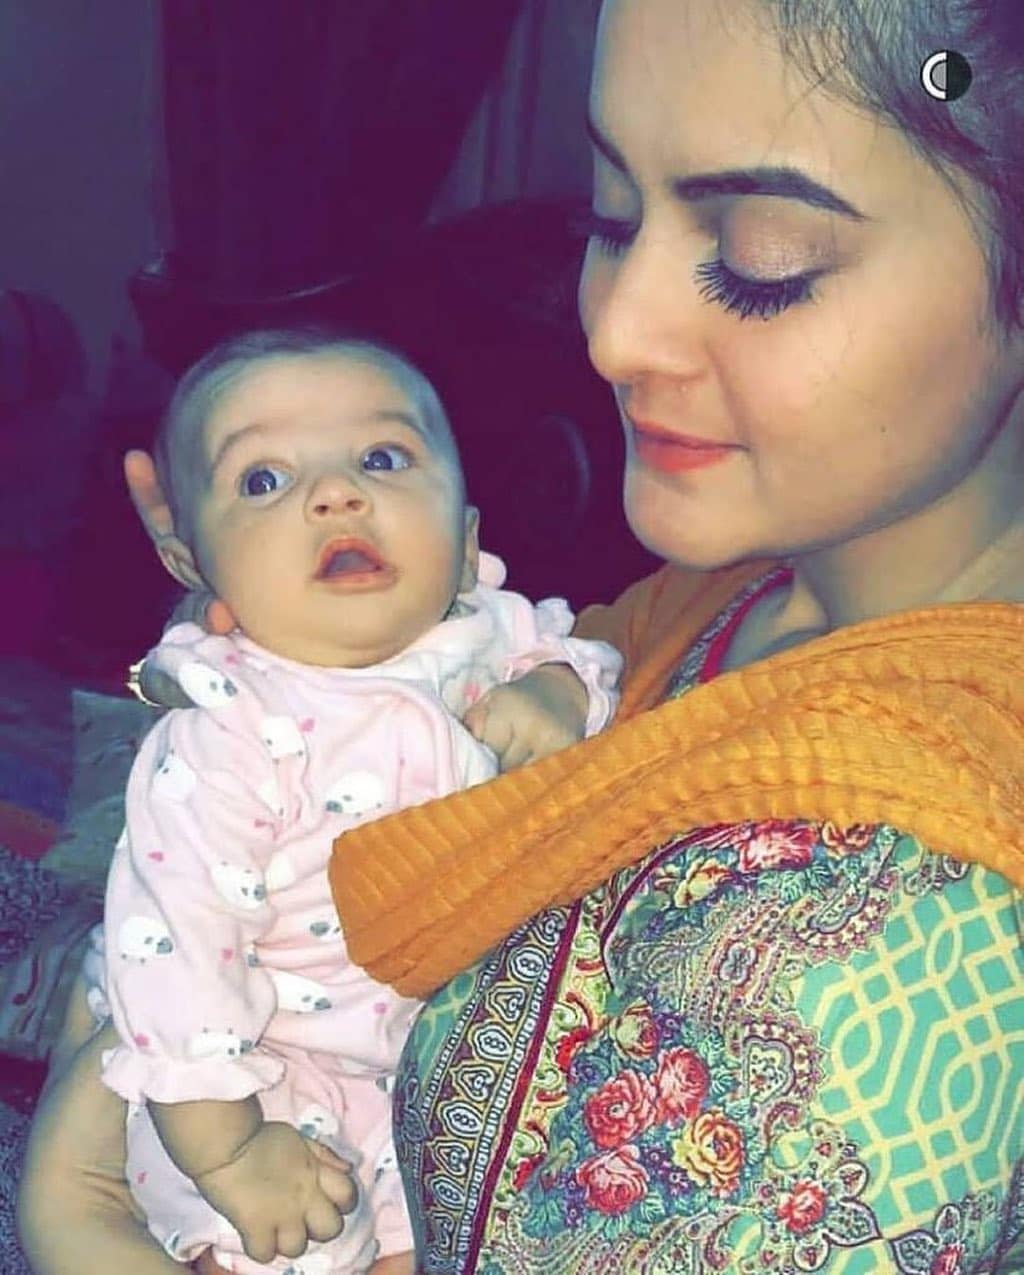 New Cute Clicks of Aiman and Muneeb Daughter Amal